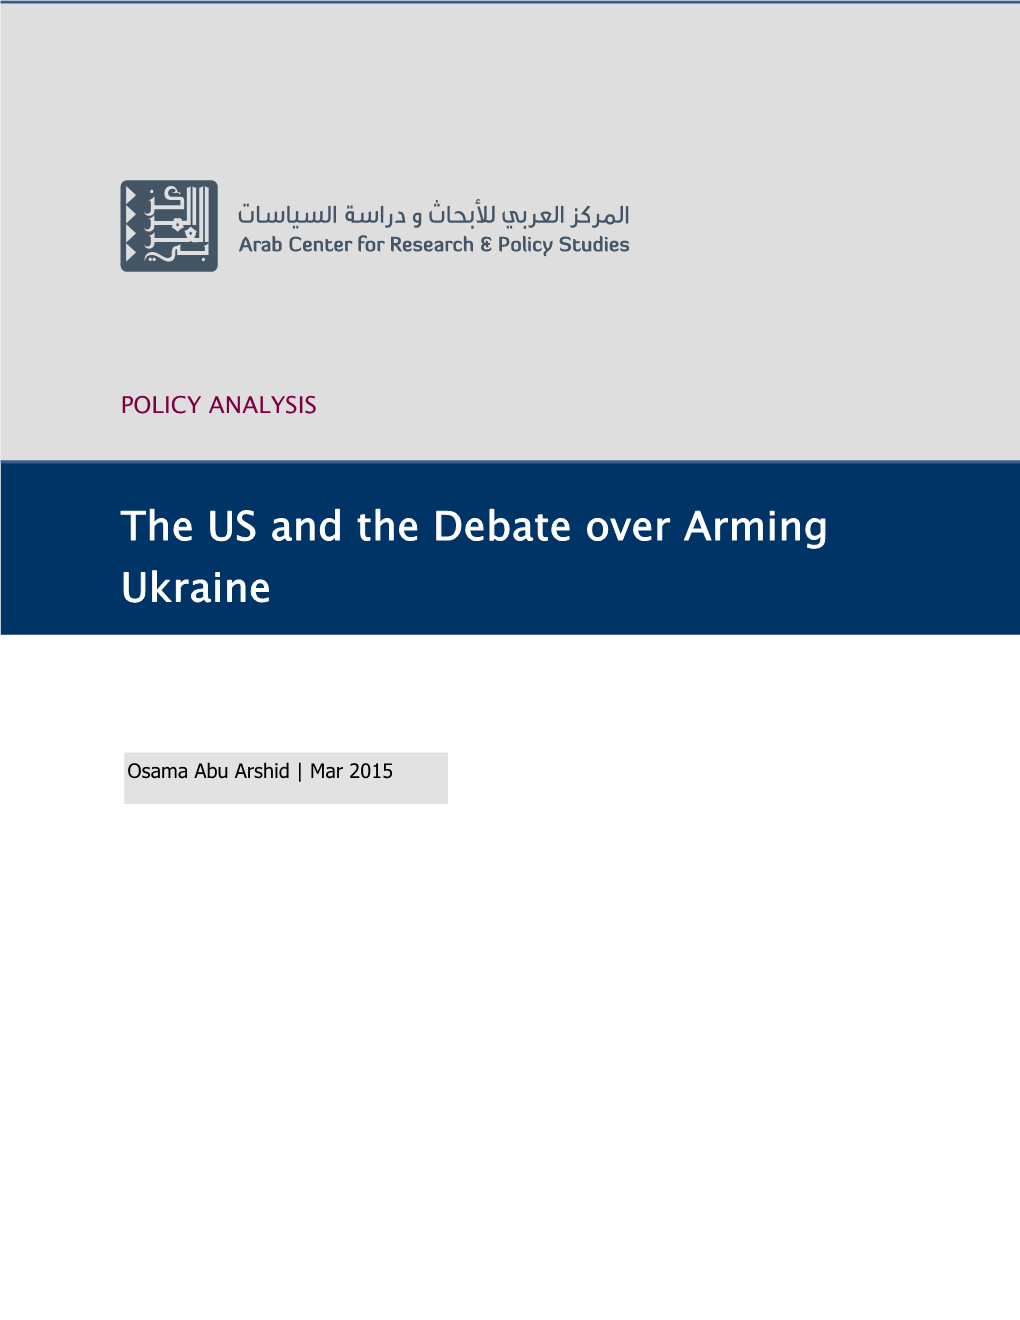 The US and the Debate Over Arming Ukraine